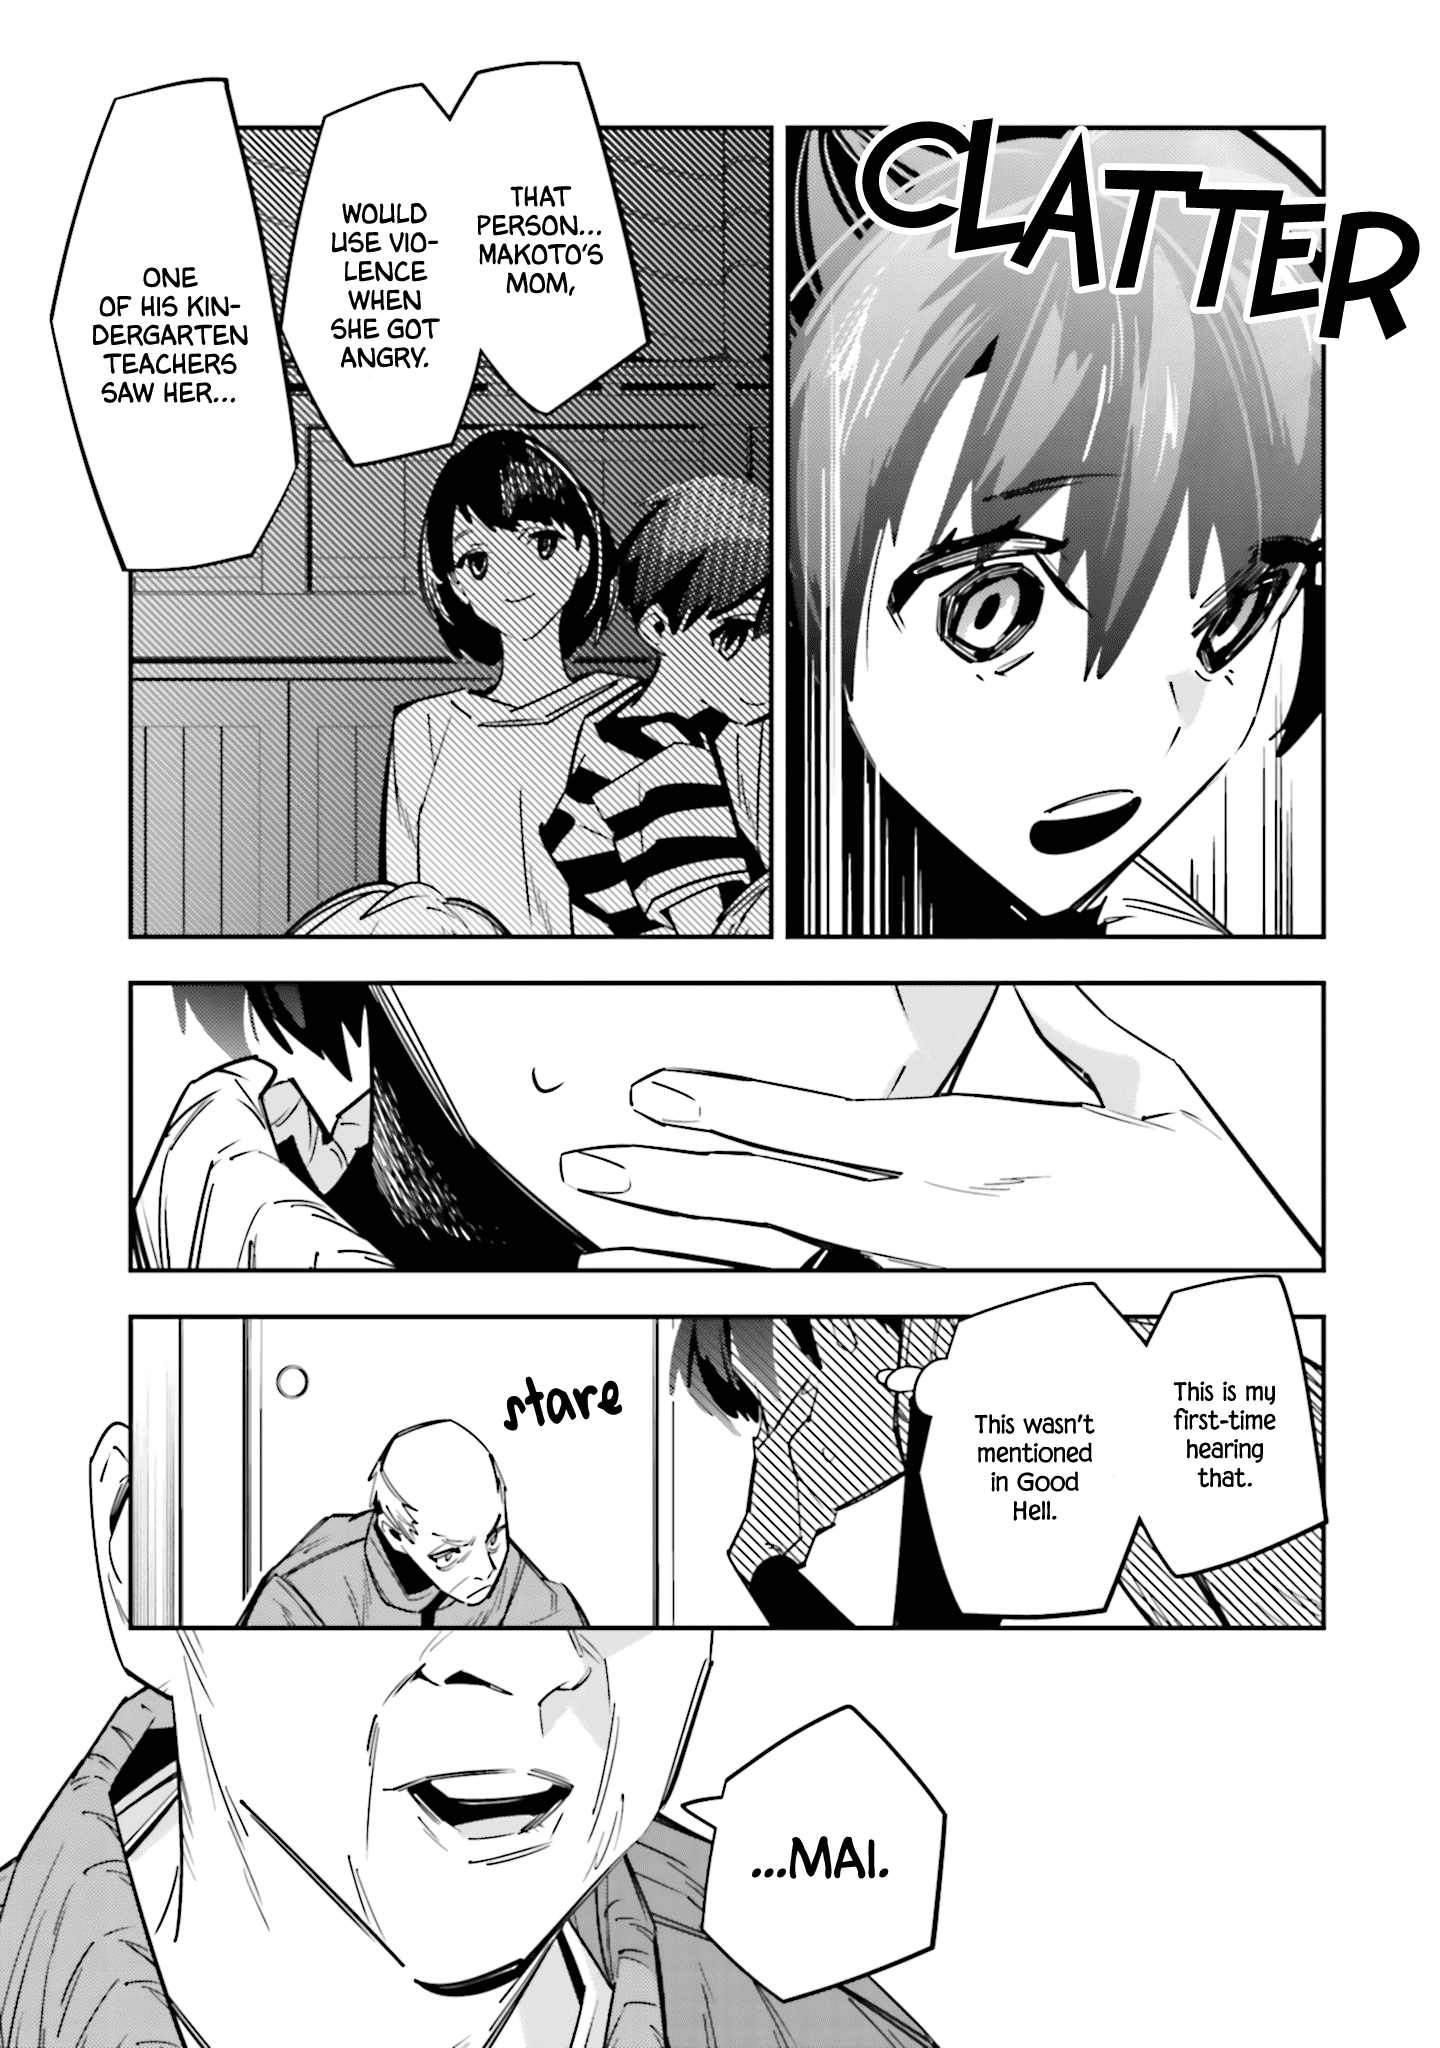 I Reincarnated As The Little Sister Of A Death Game Manga's Murder Mastermind And Failed Chapter 3 #9